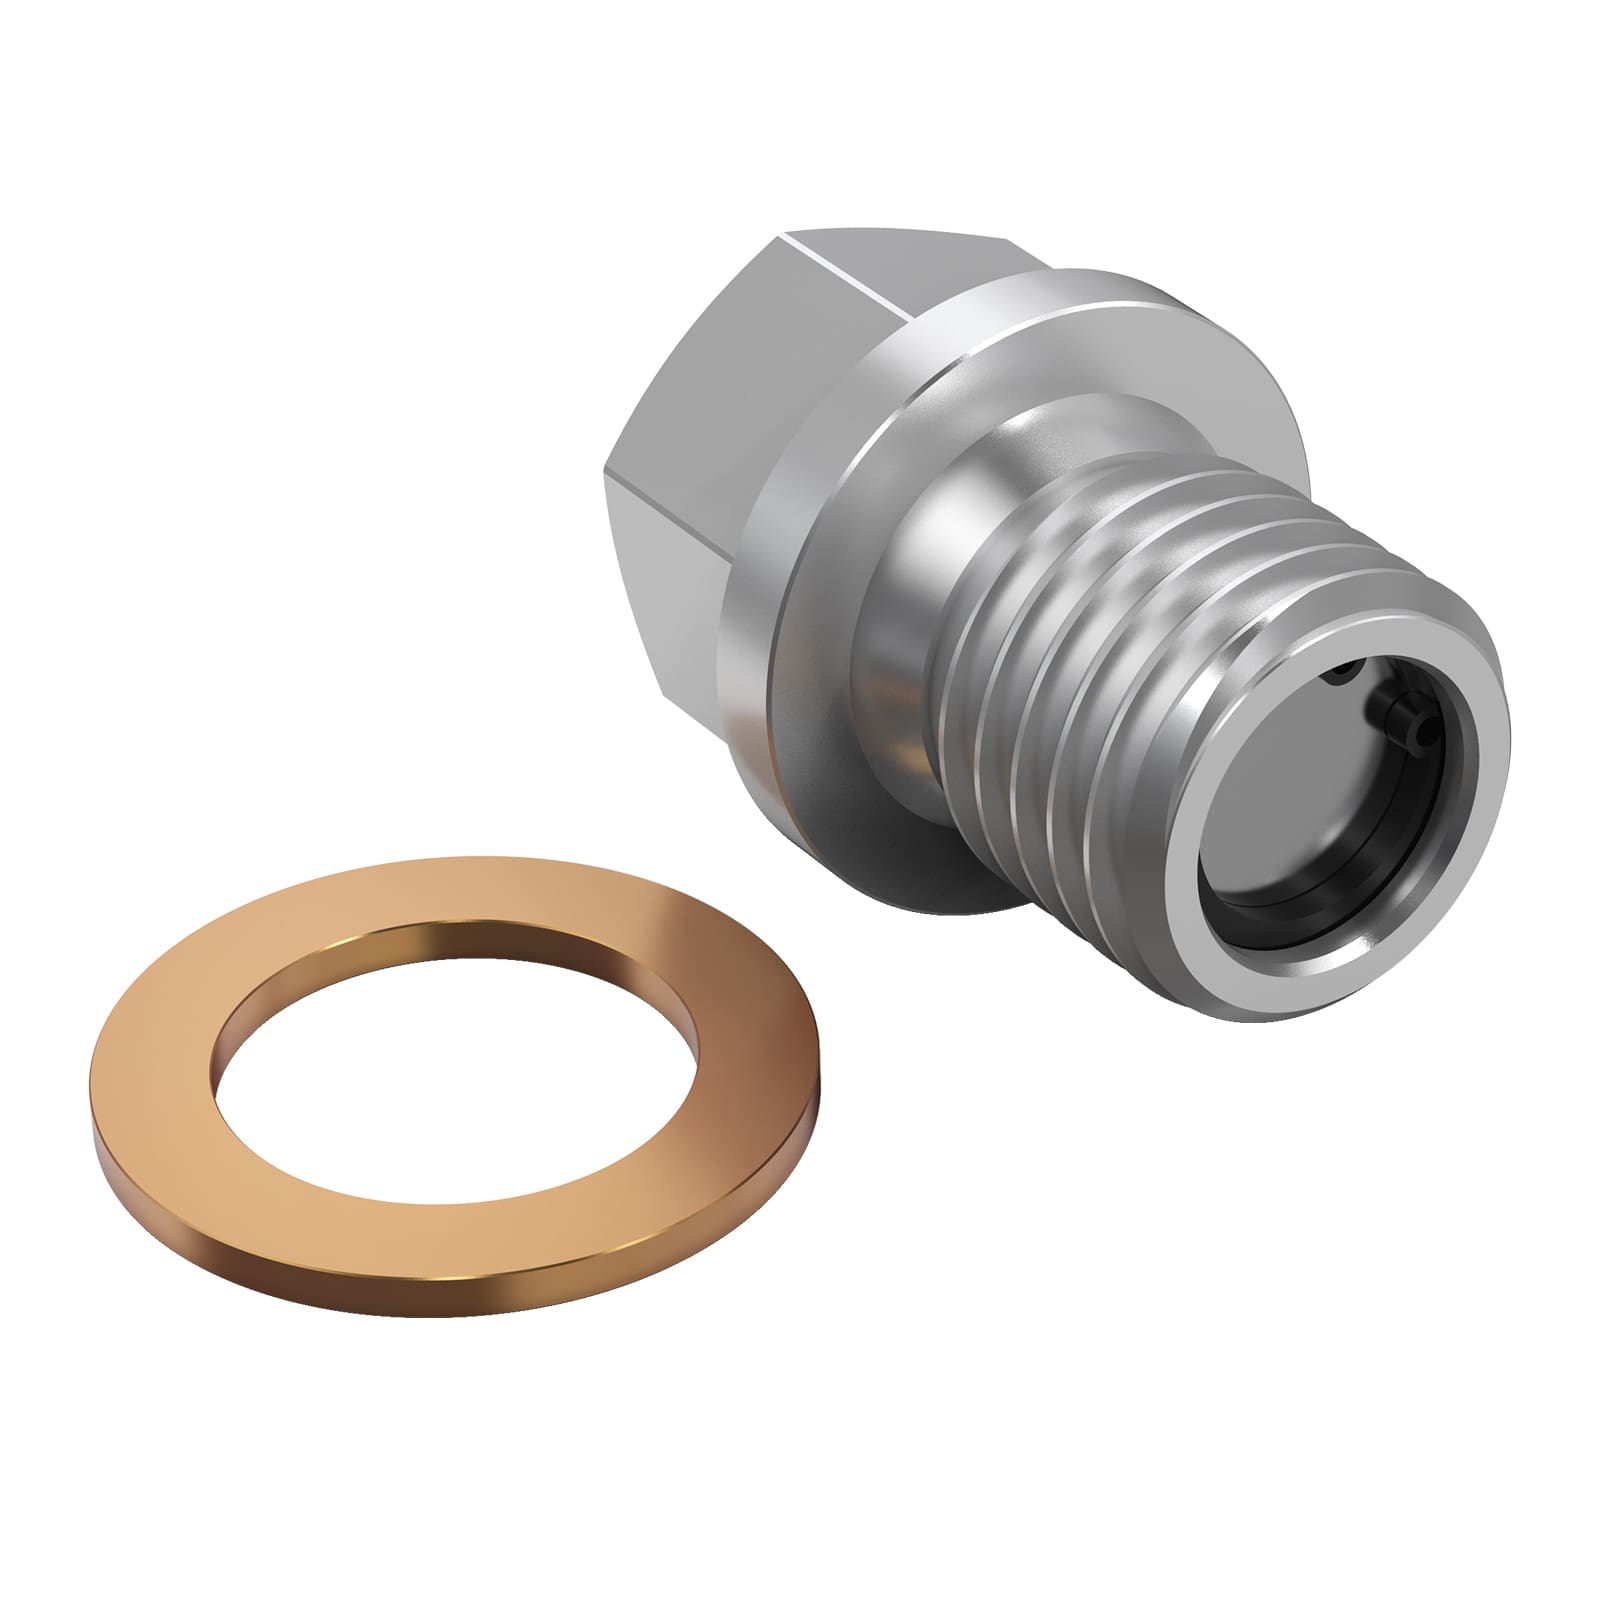 Magnetic Oil Drain Plug And Washer M12X1.5 For Polaris RZR Sportsman Ranger Replaces 7052306